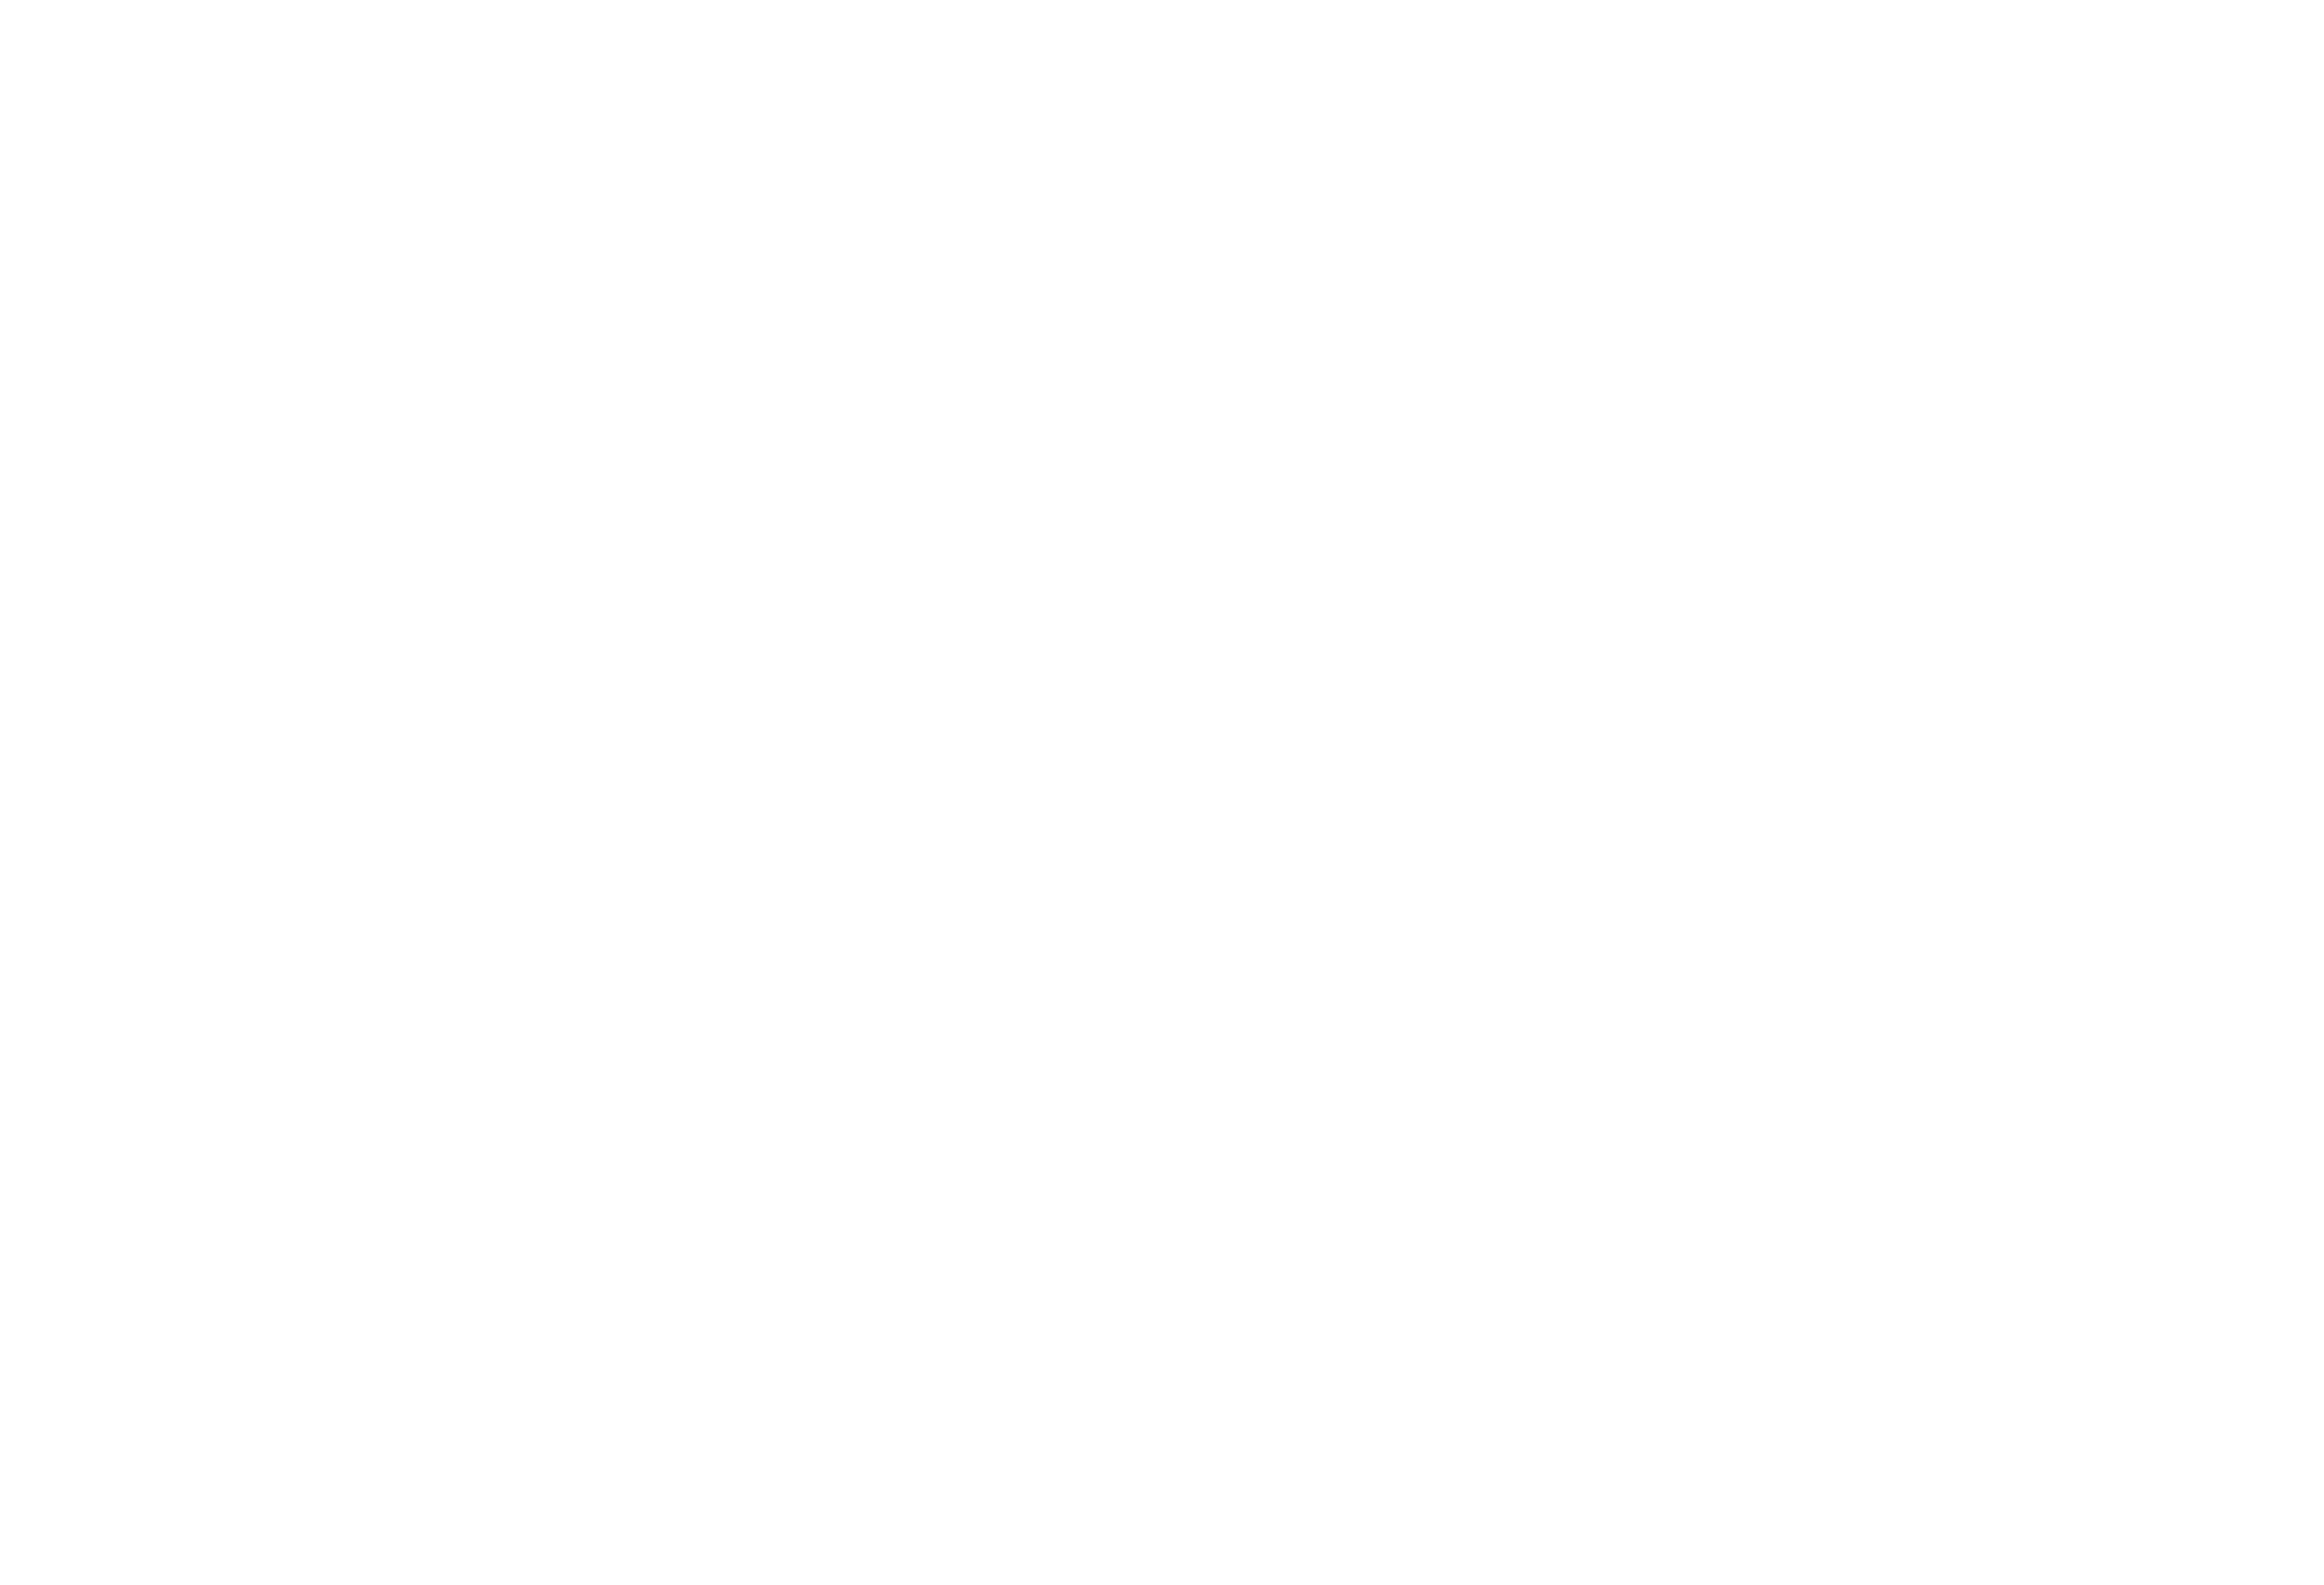 Vascular Access Services